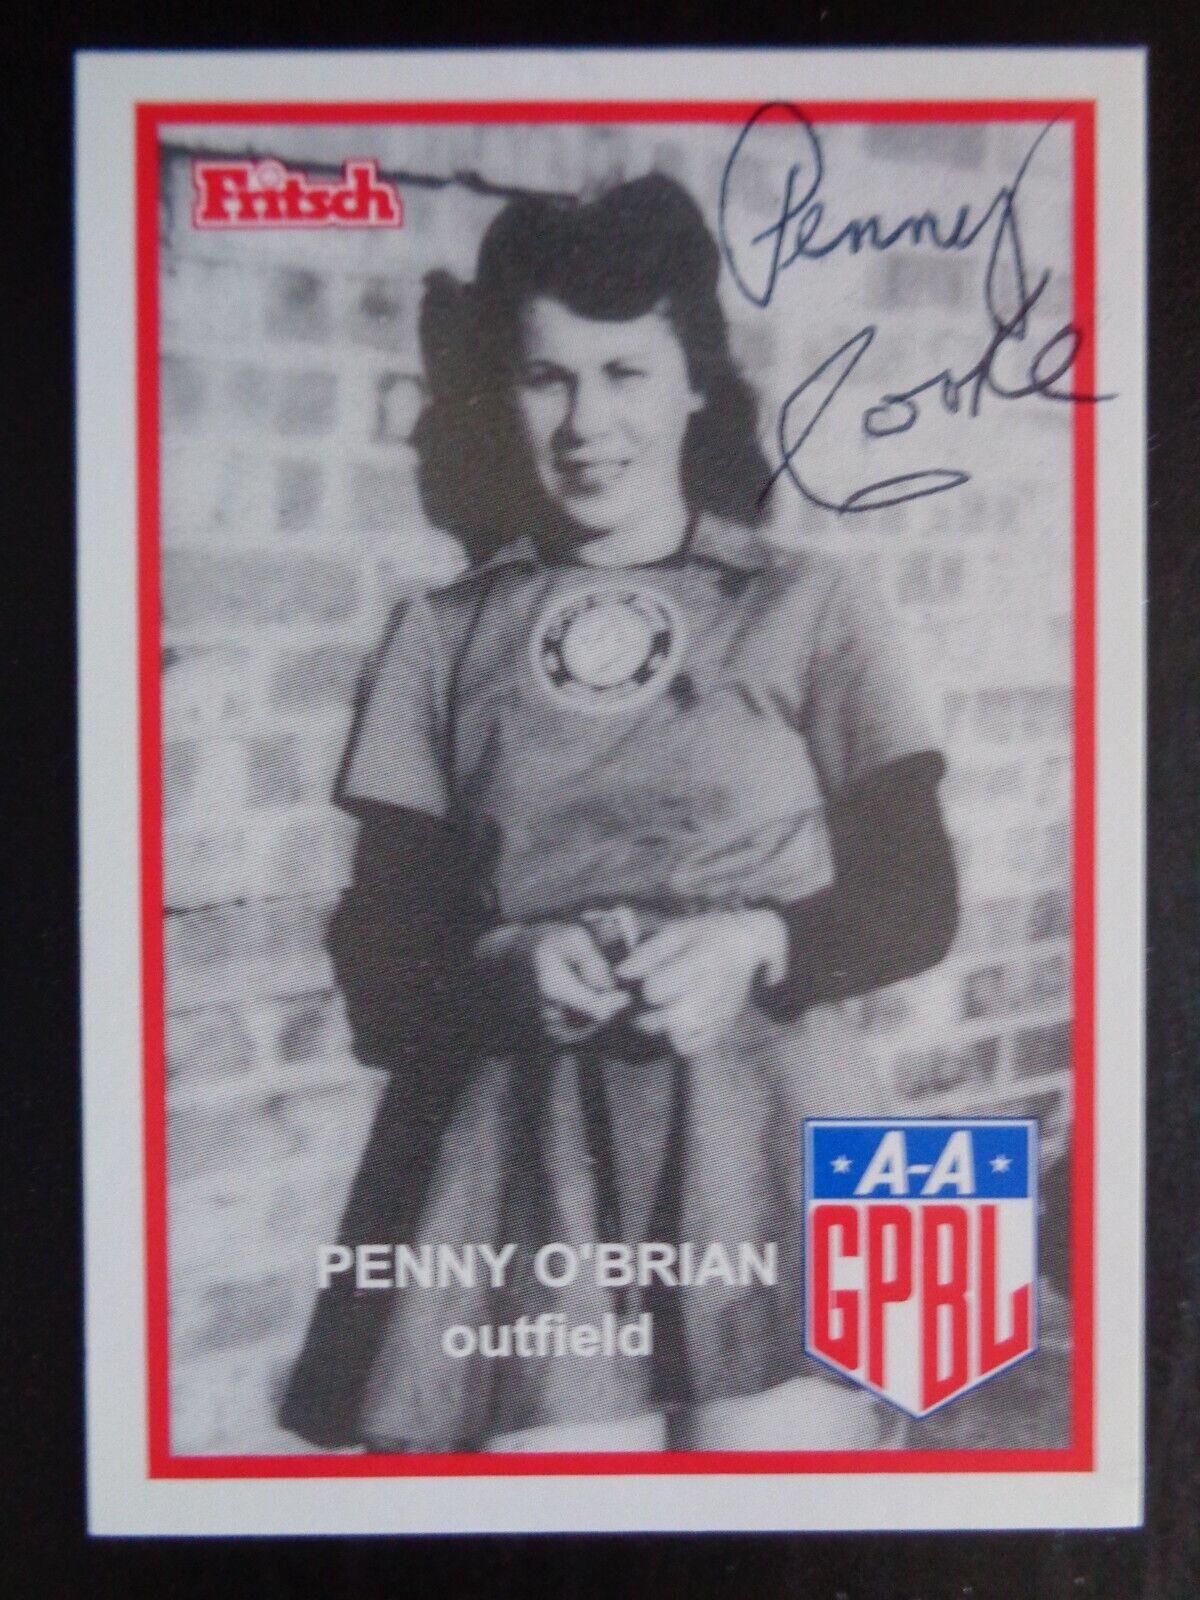 Penny O\'Brian signed autograph card -  1995-96 Larry Fritch Cards  - AAGPBL PSA